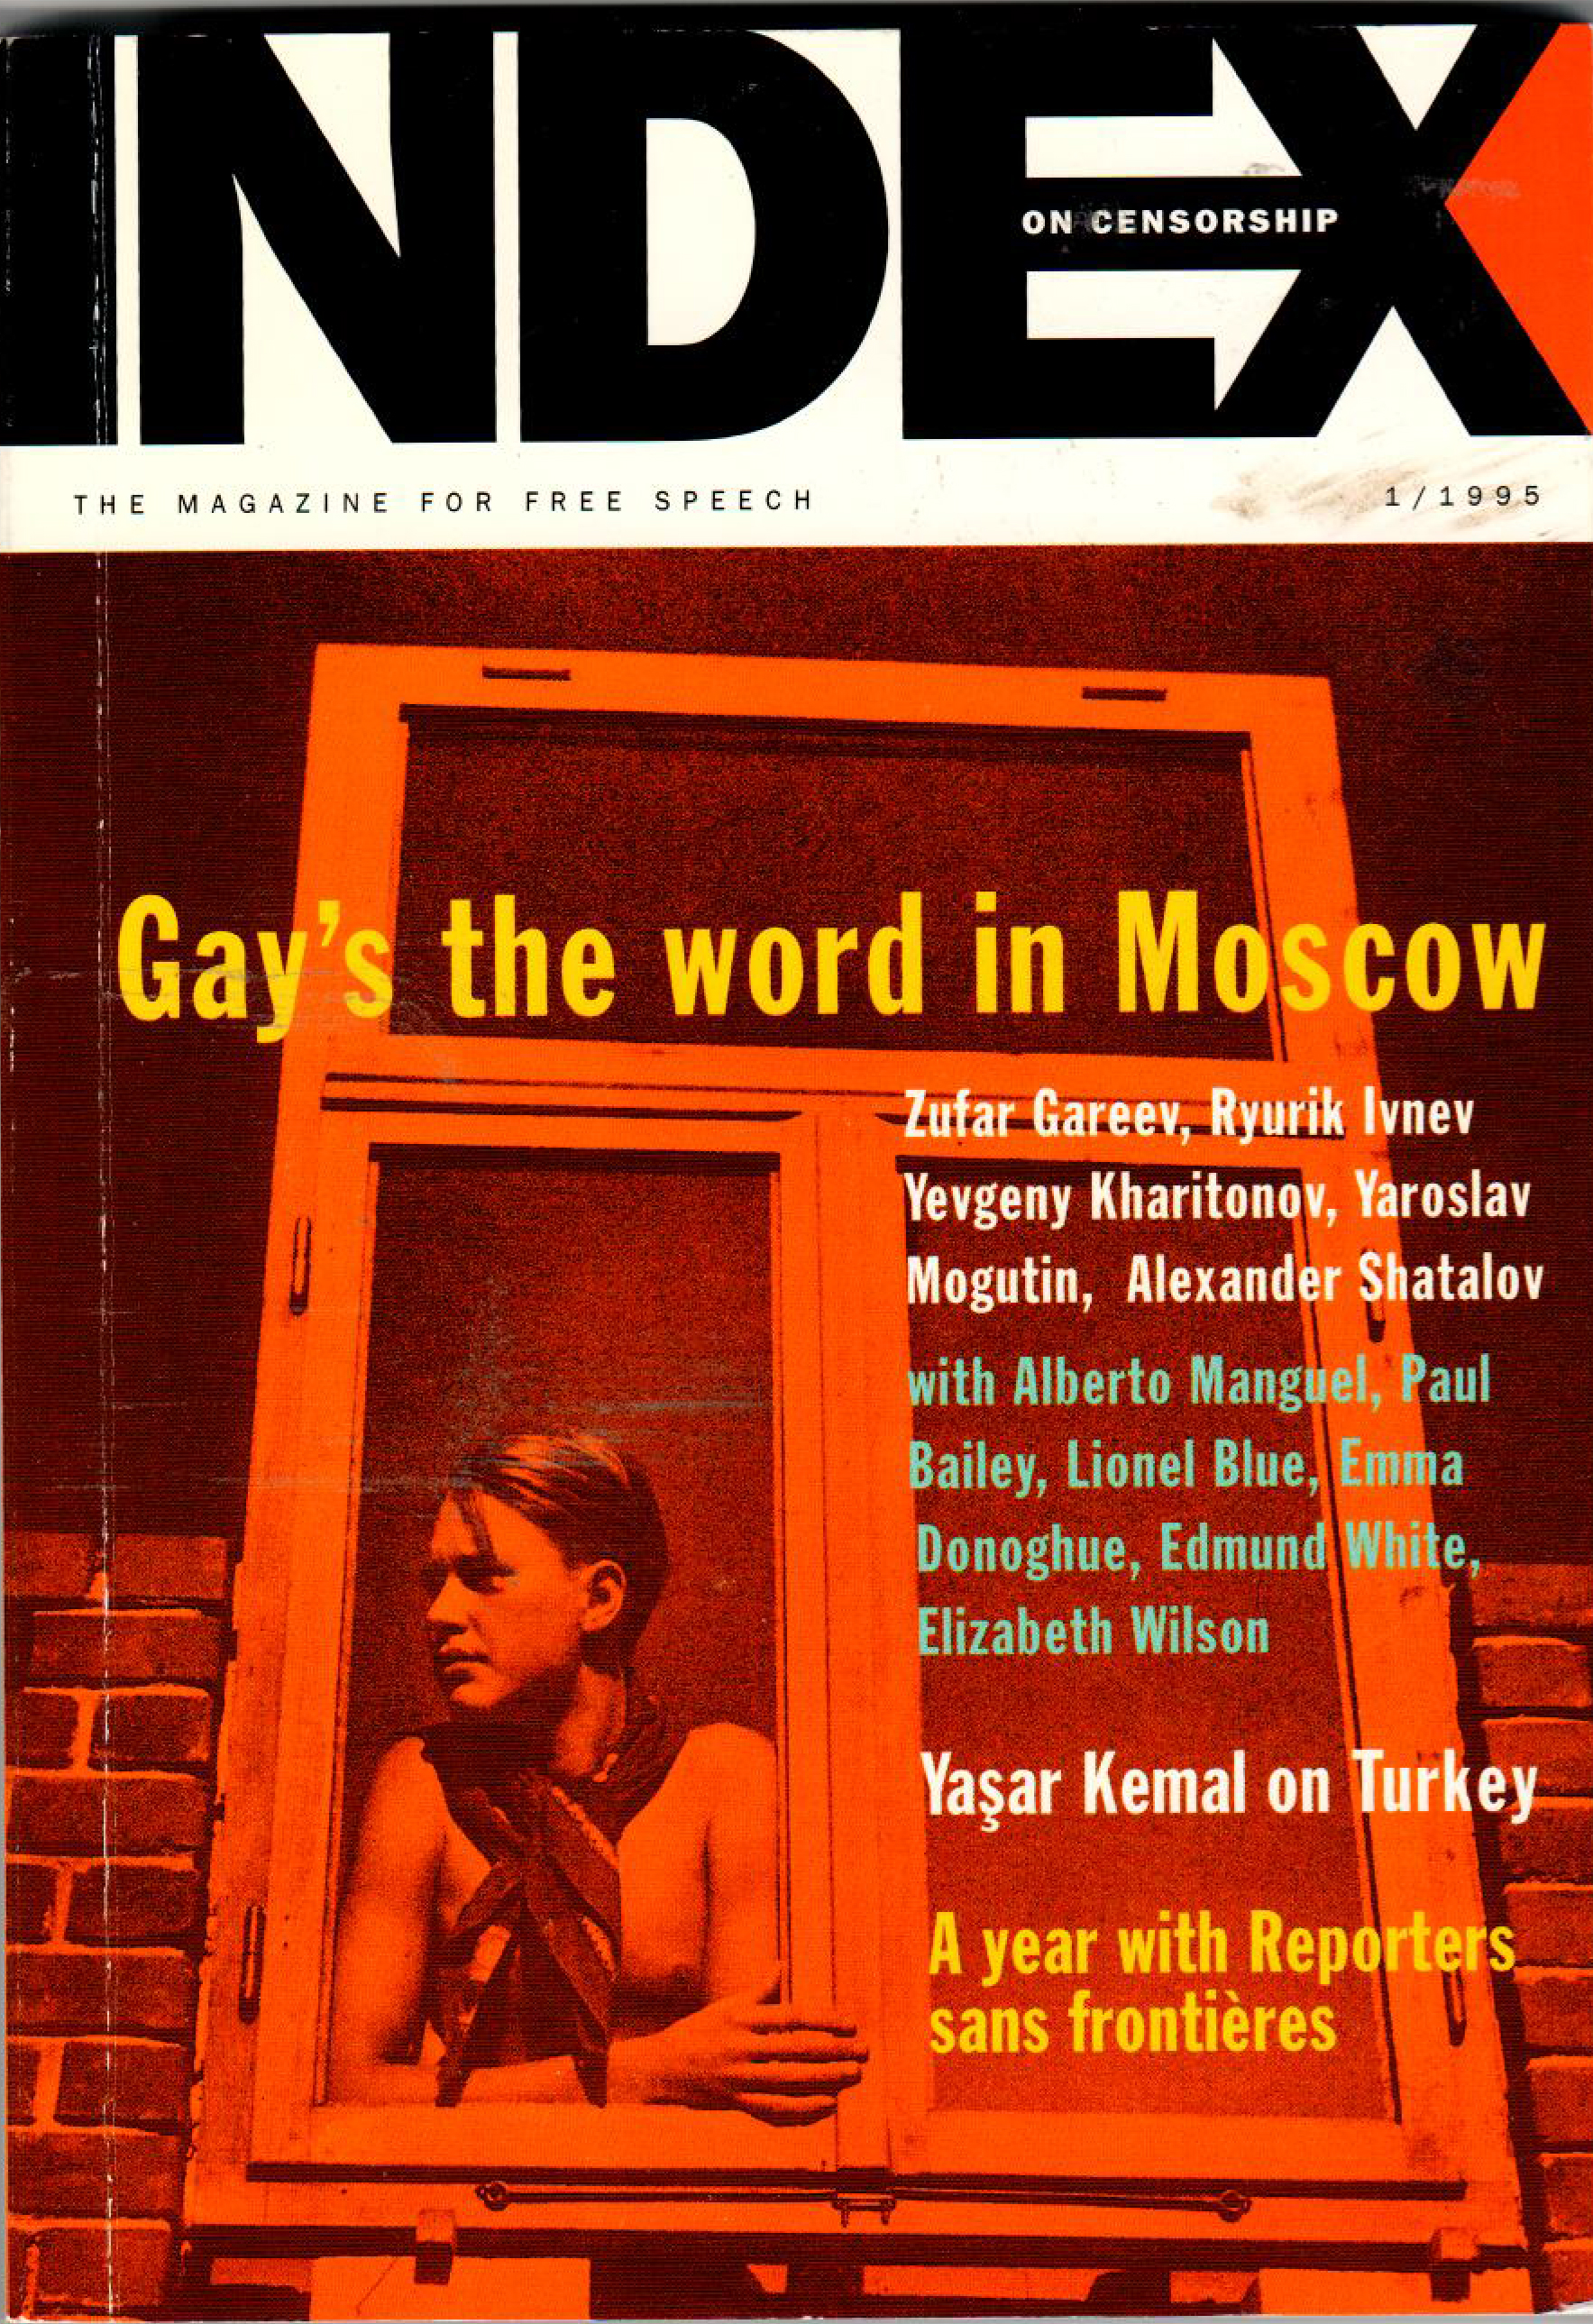 Gay's the word in Moscow, the January 1995 issue of Index on Censorship magazine.